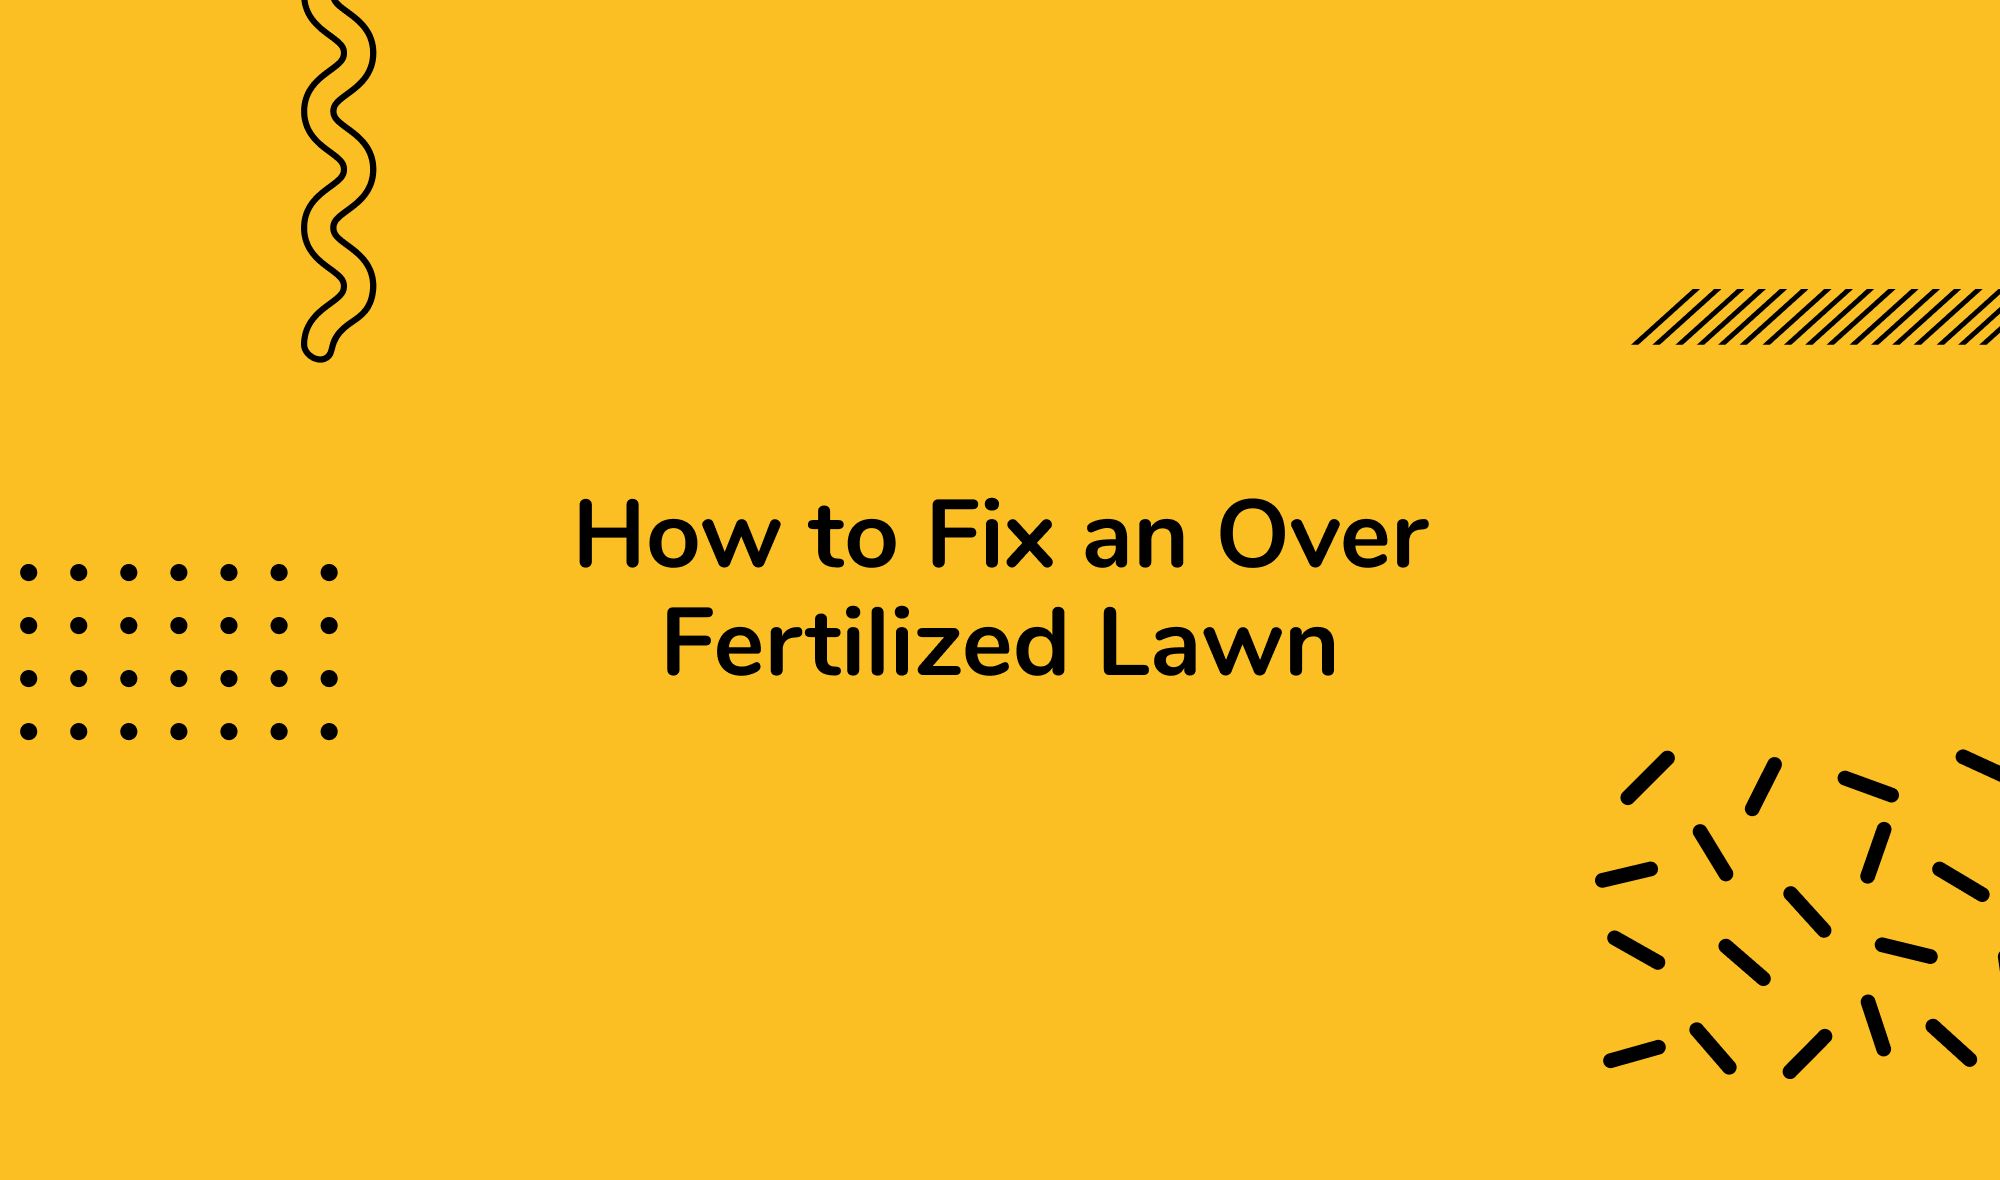 How to Fix an Over Fertilized Lawn: Long-Term Strategies